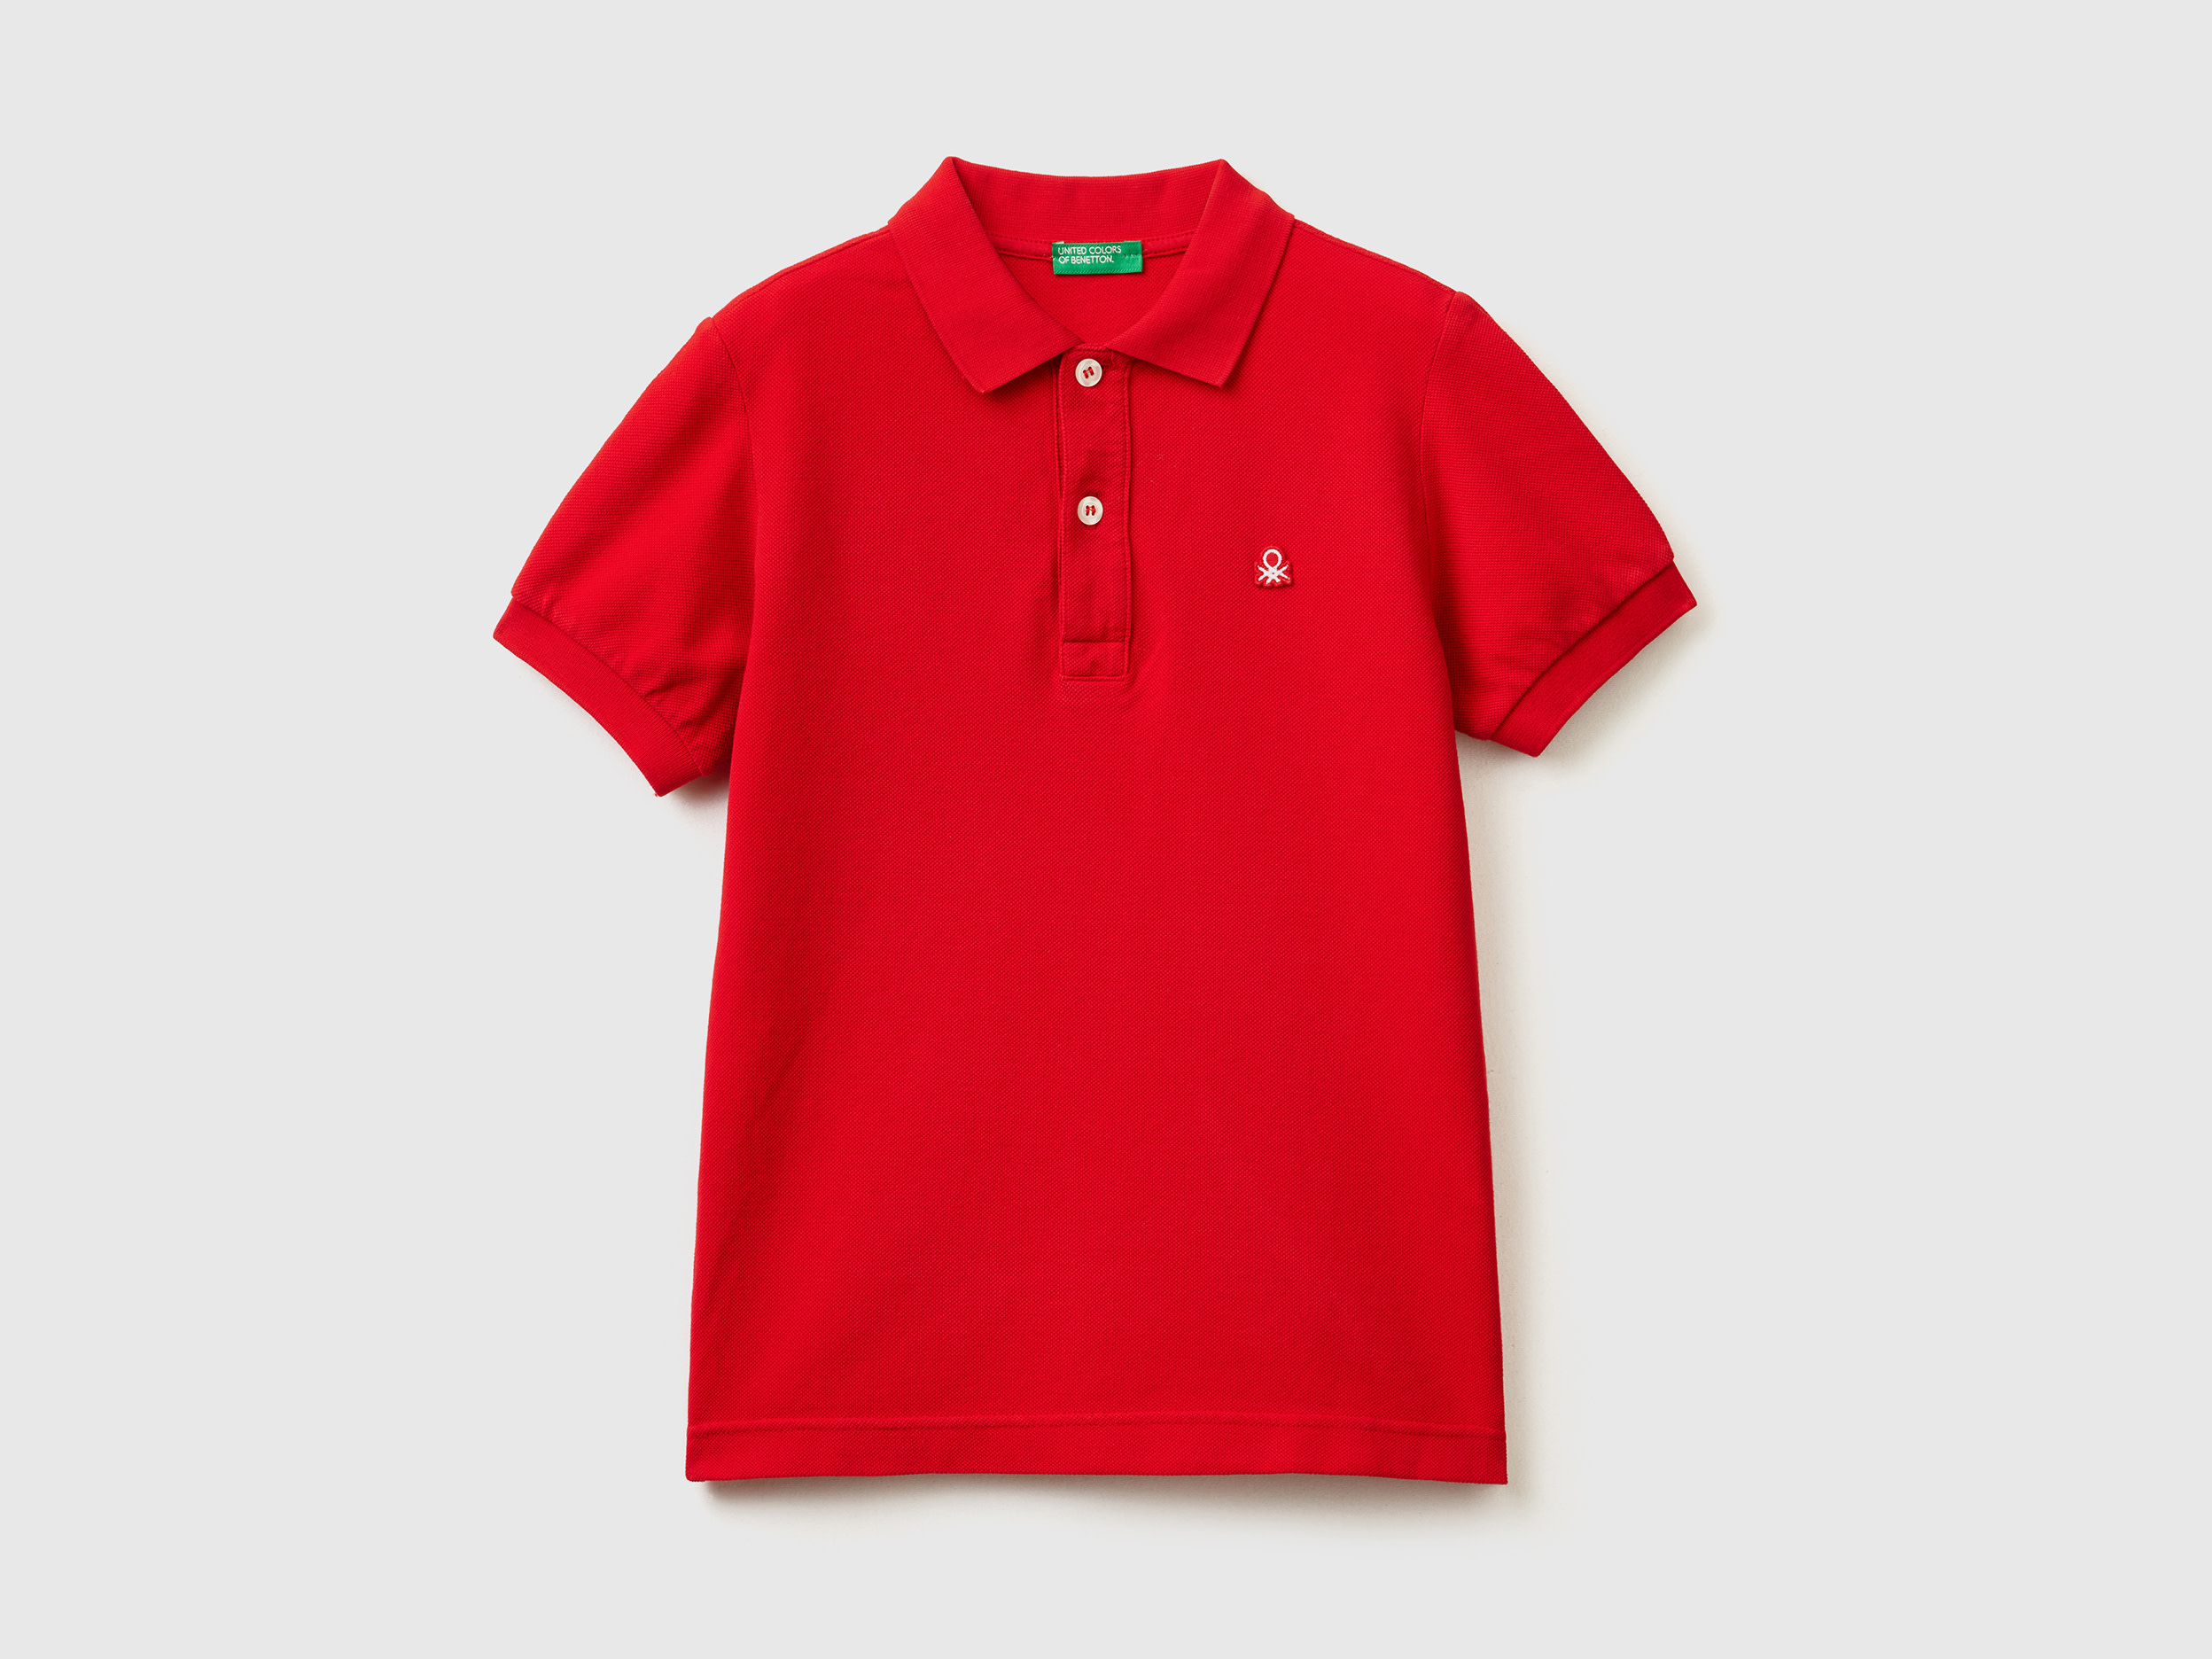 Image of Benetton, Slim Fit Polo In 100% Organic Cotton, size S, Red, Kids